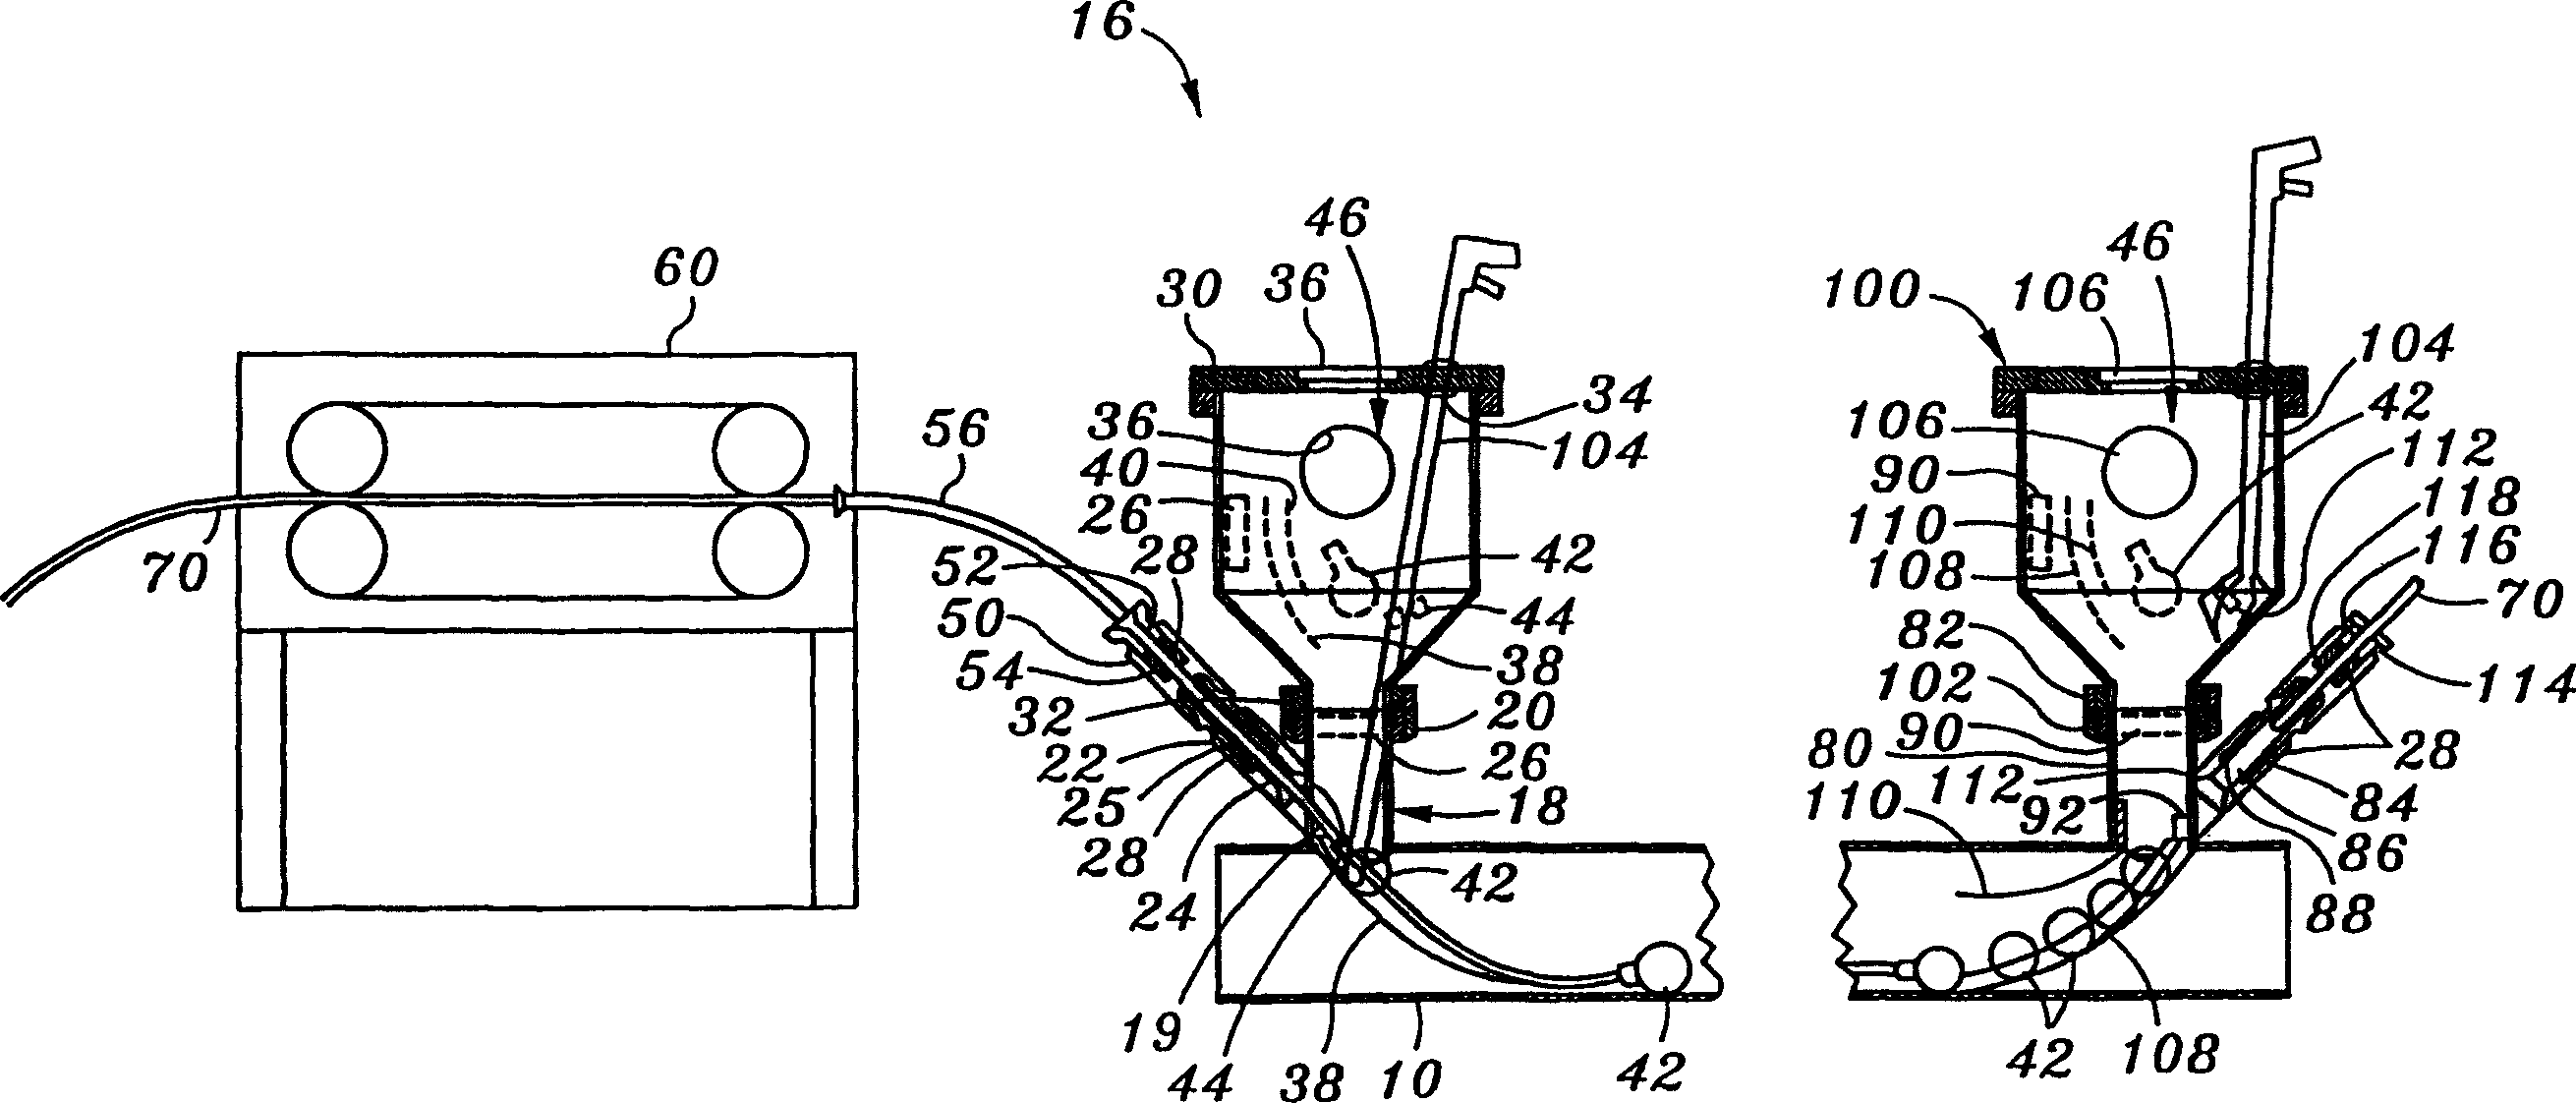 Methods and systems for installing cable and conduit in pipelines